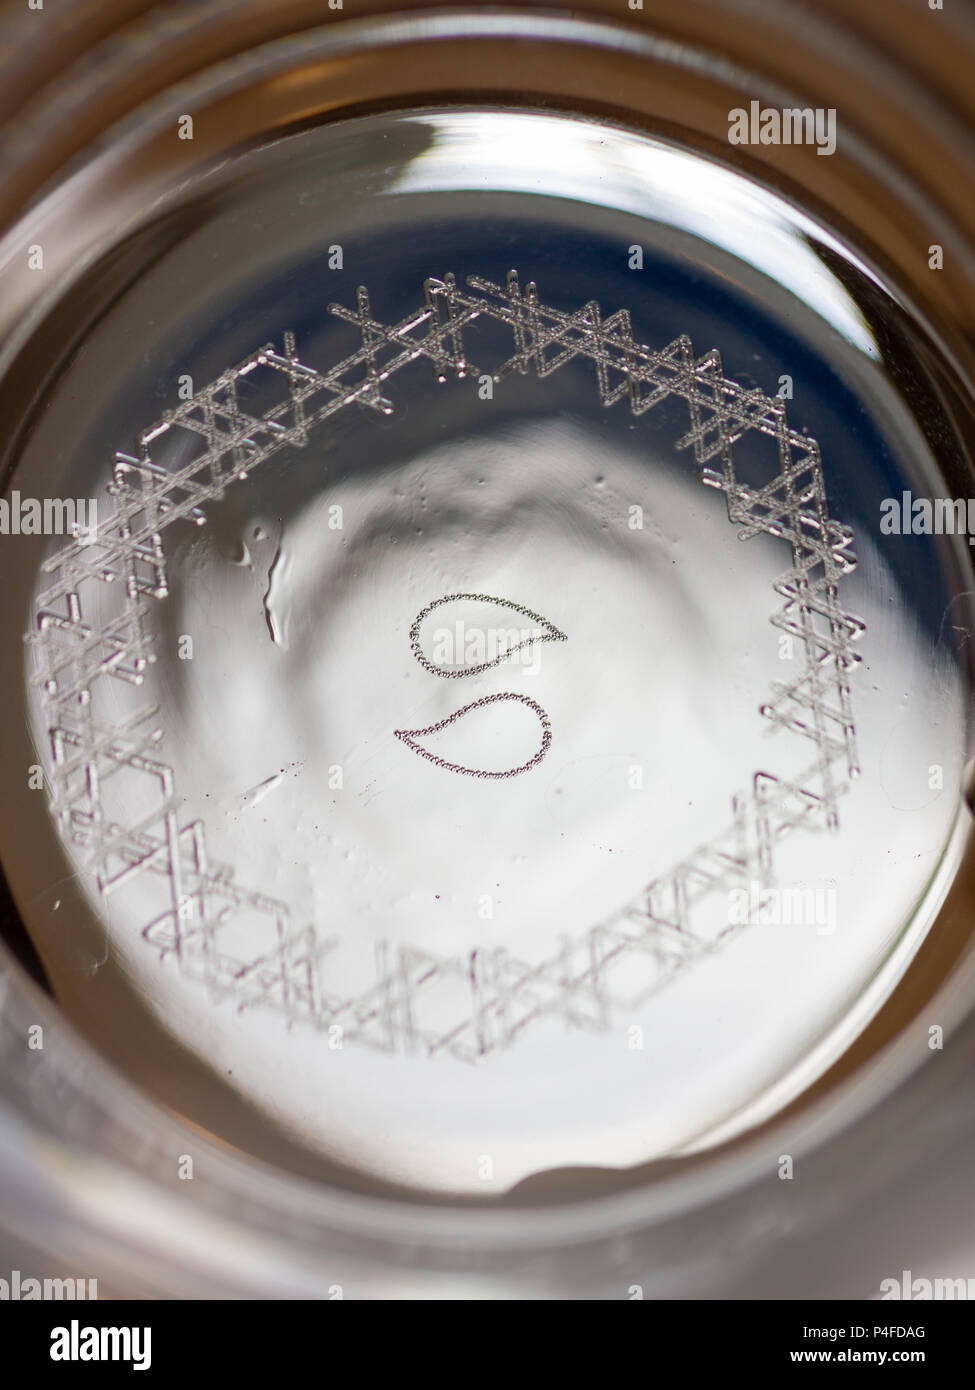 https://c8.alamy.com/comp/P4FDAG/nucleation-marks-engraved-with-a-laser-on-the-bottom-of-a-glass-to-increase-carbonation-of-beer-P4FDAG.jpg